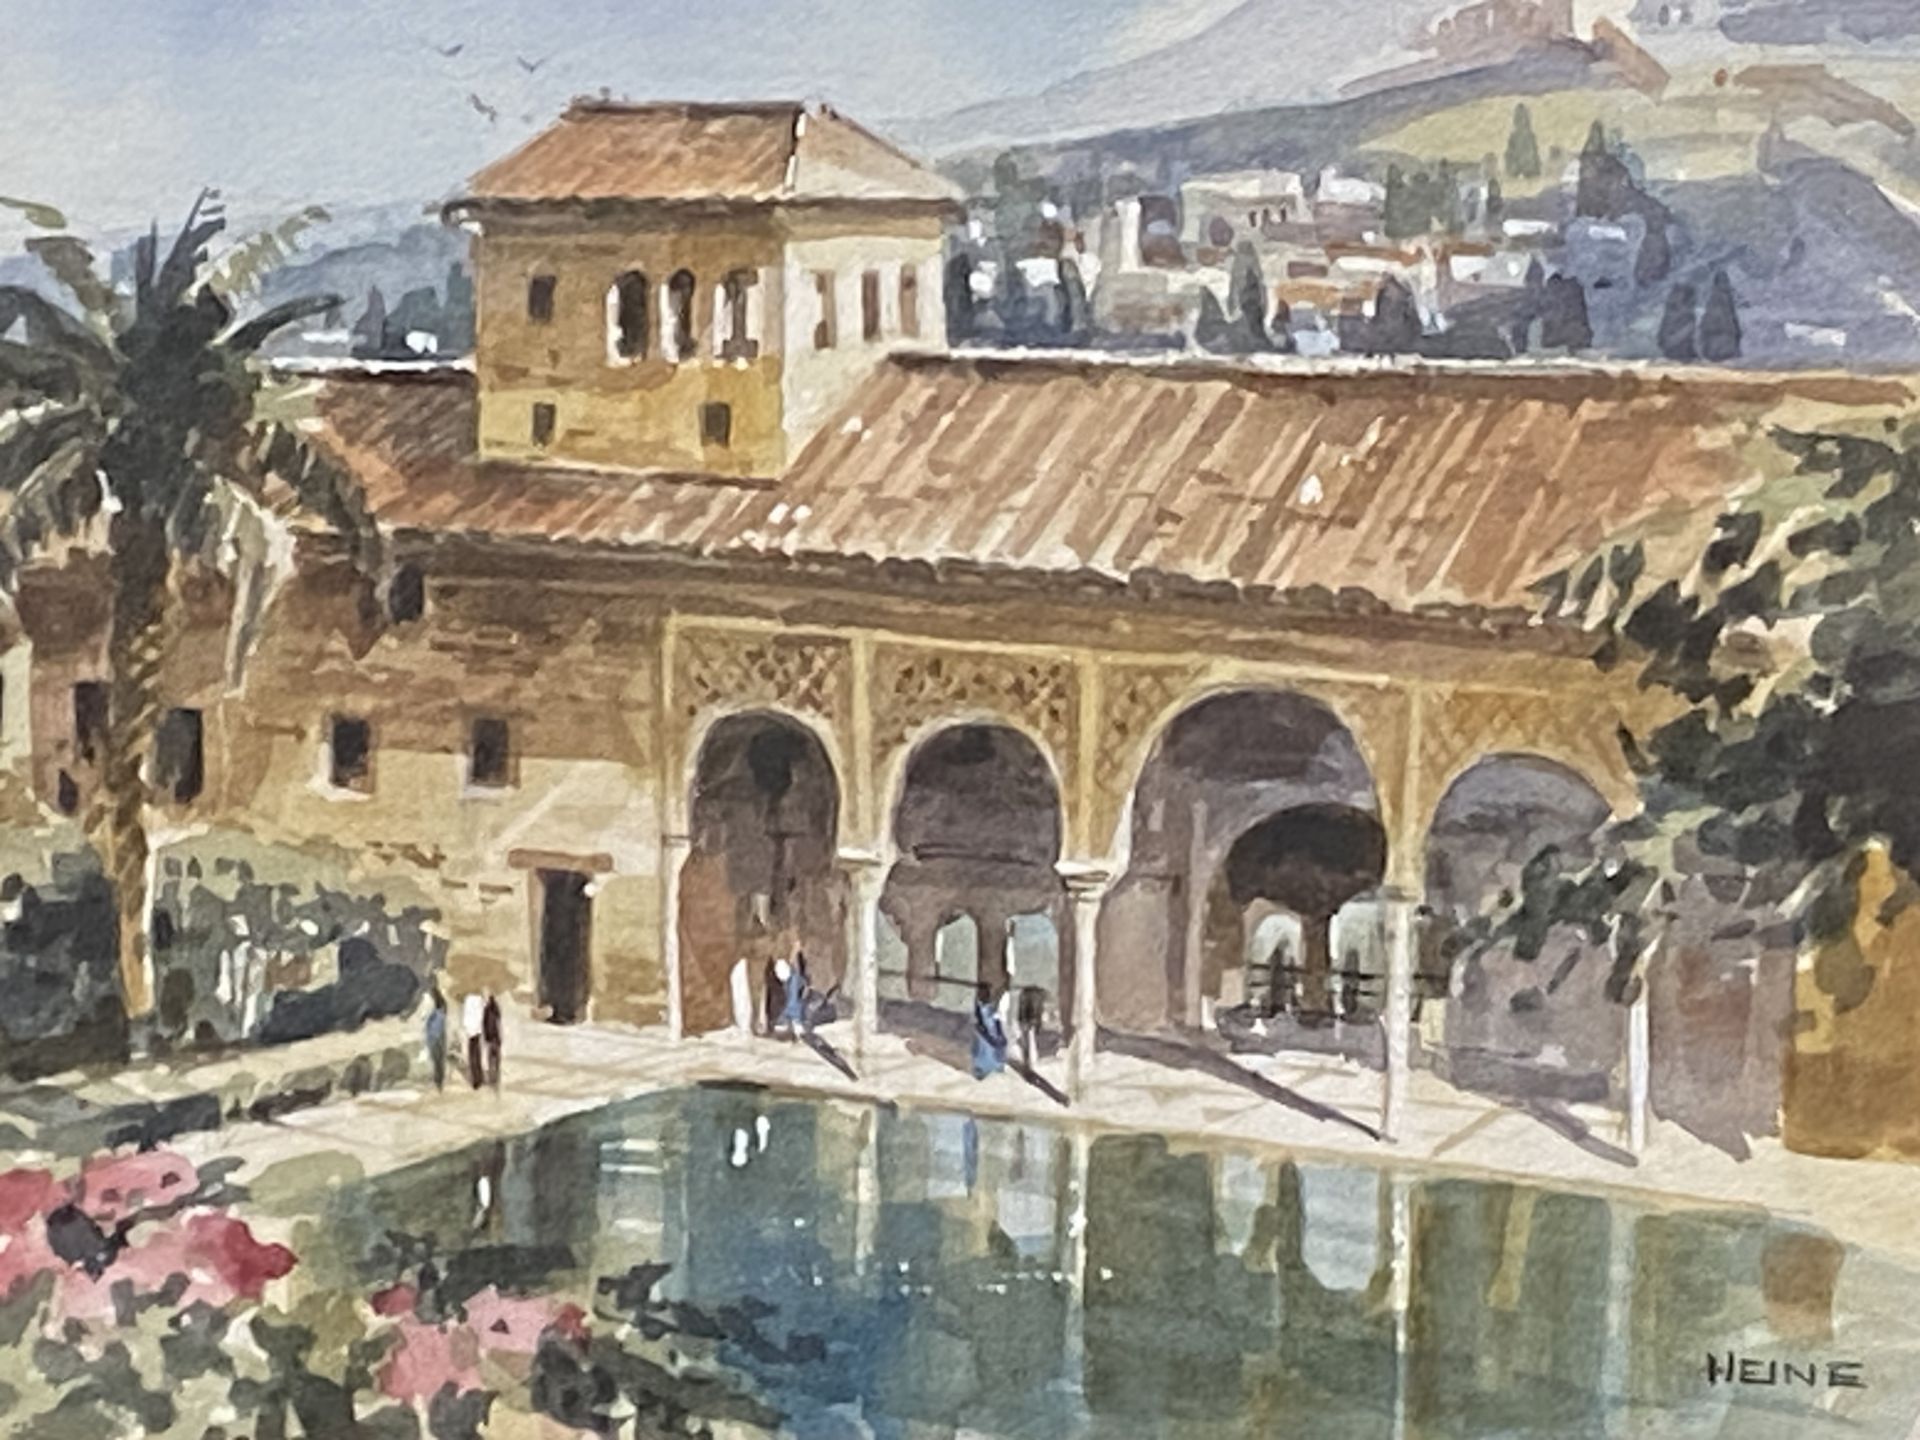 Framed and glazed watercolour of the Lady's Tower in Alhambra - Image 3 of 3